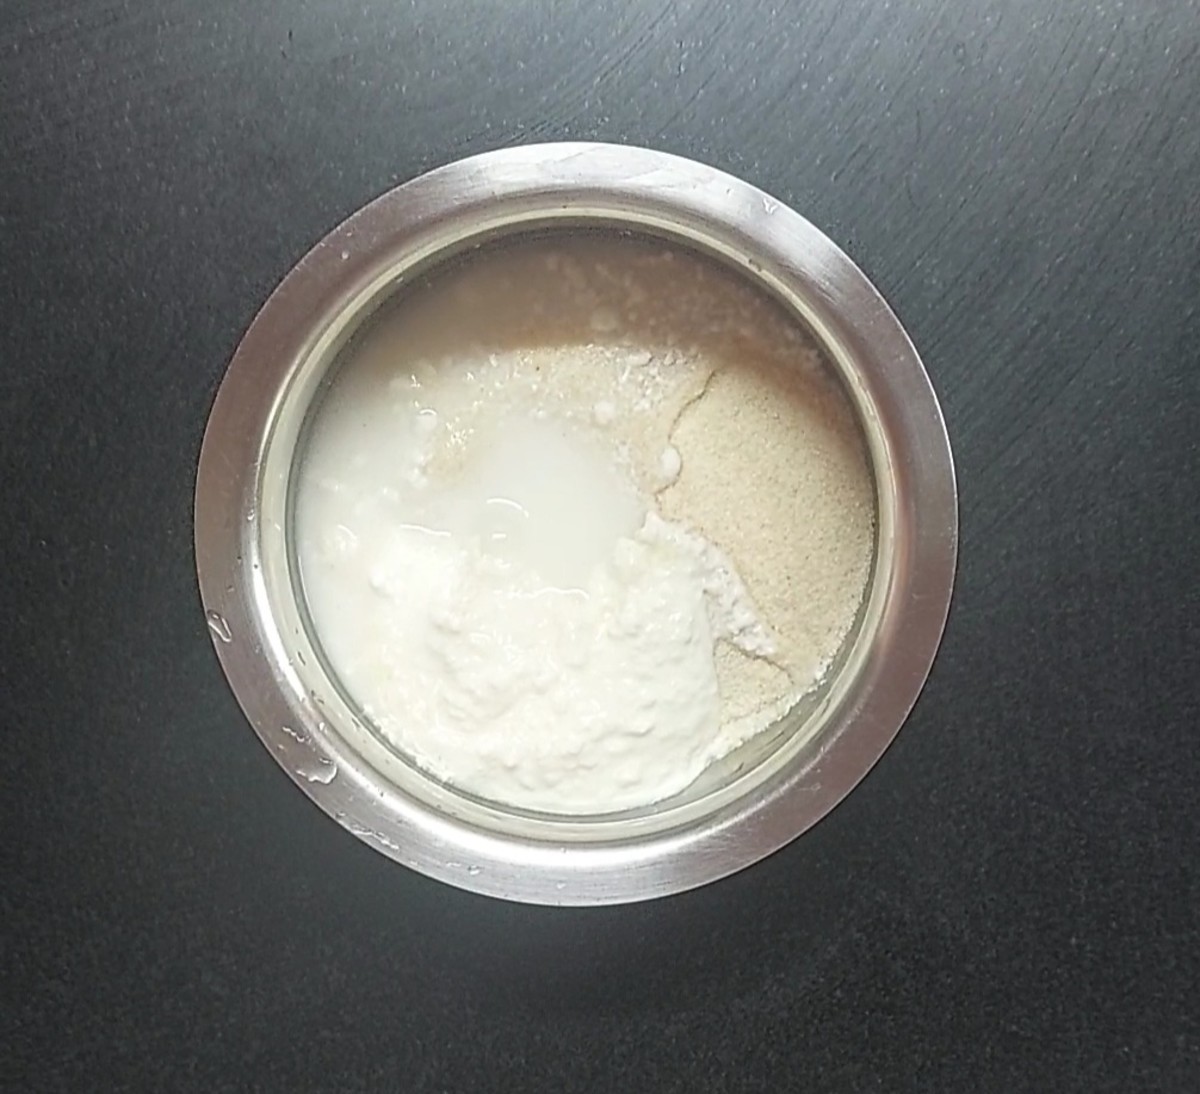 In a vessel, take 1 cup medium rava or bombay rava, 1/2 cup curd, 1/2 cup water.